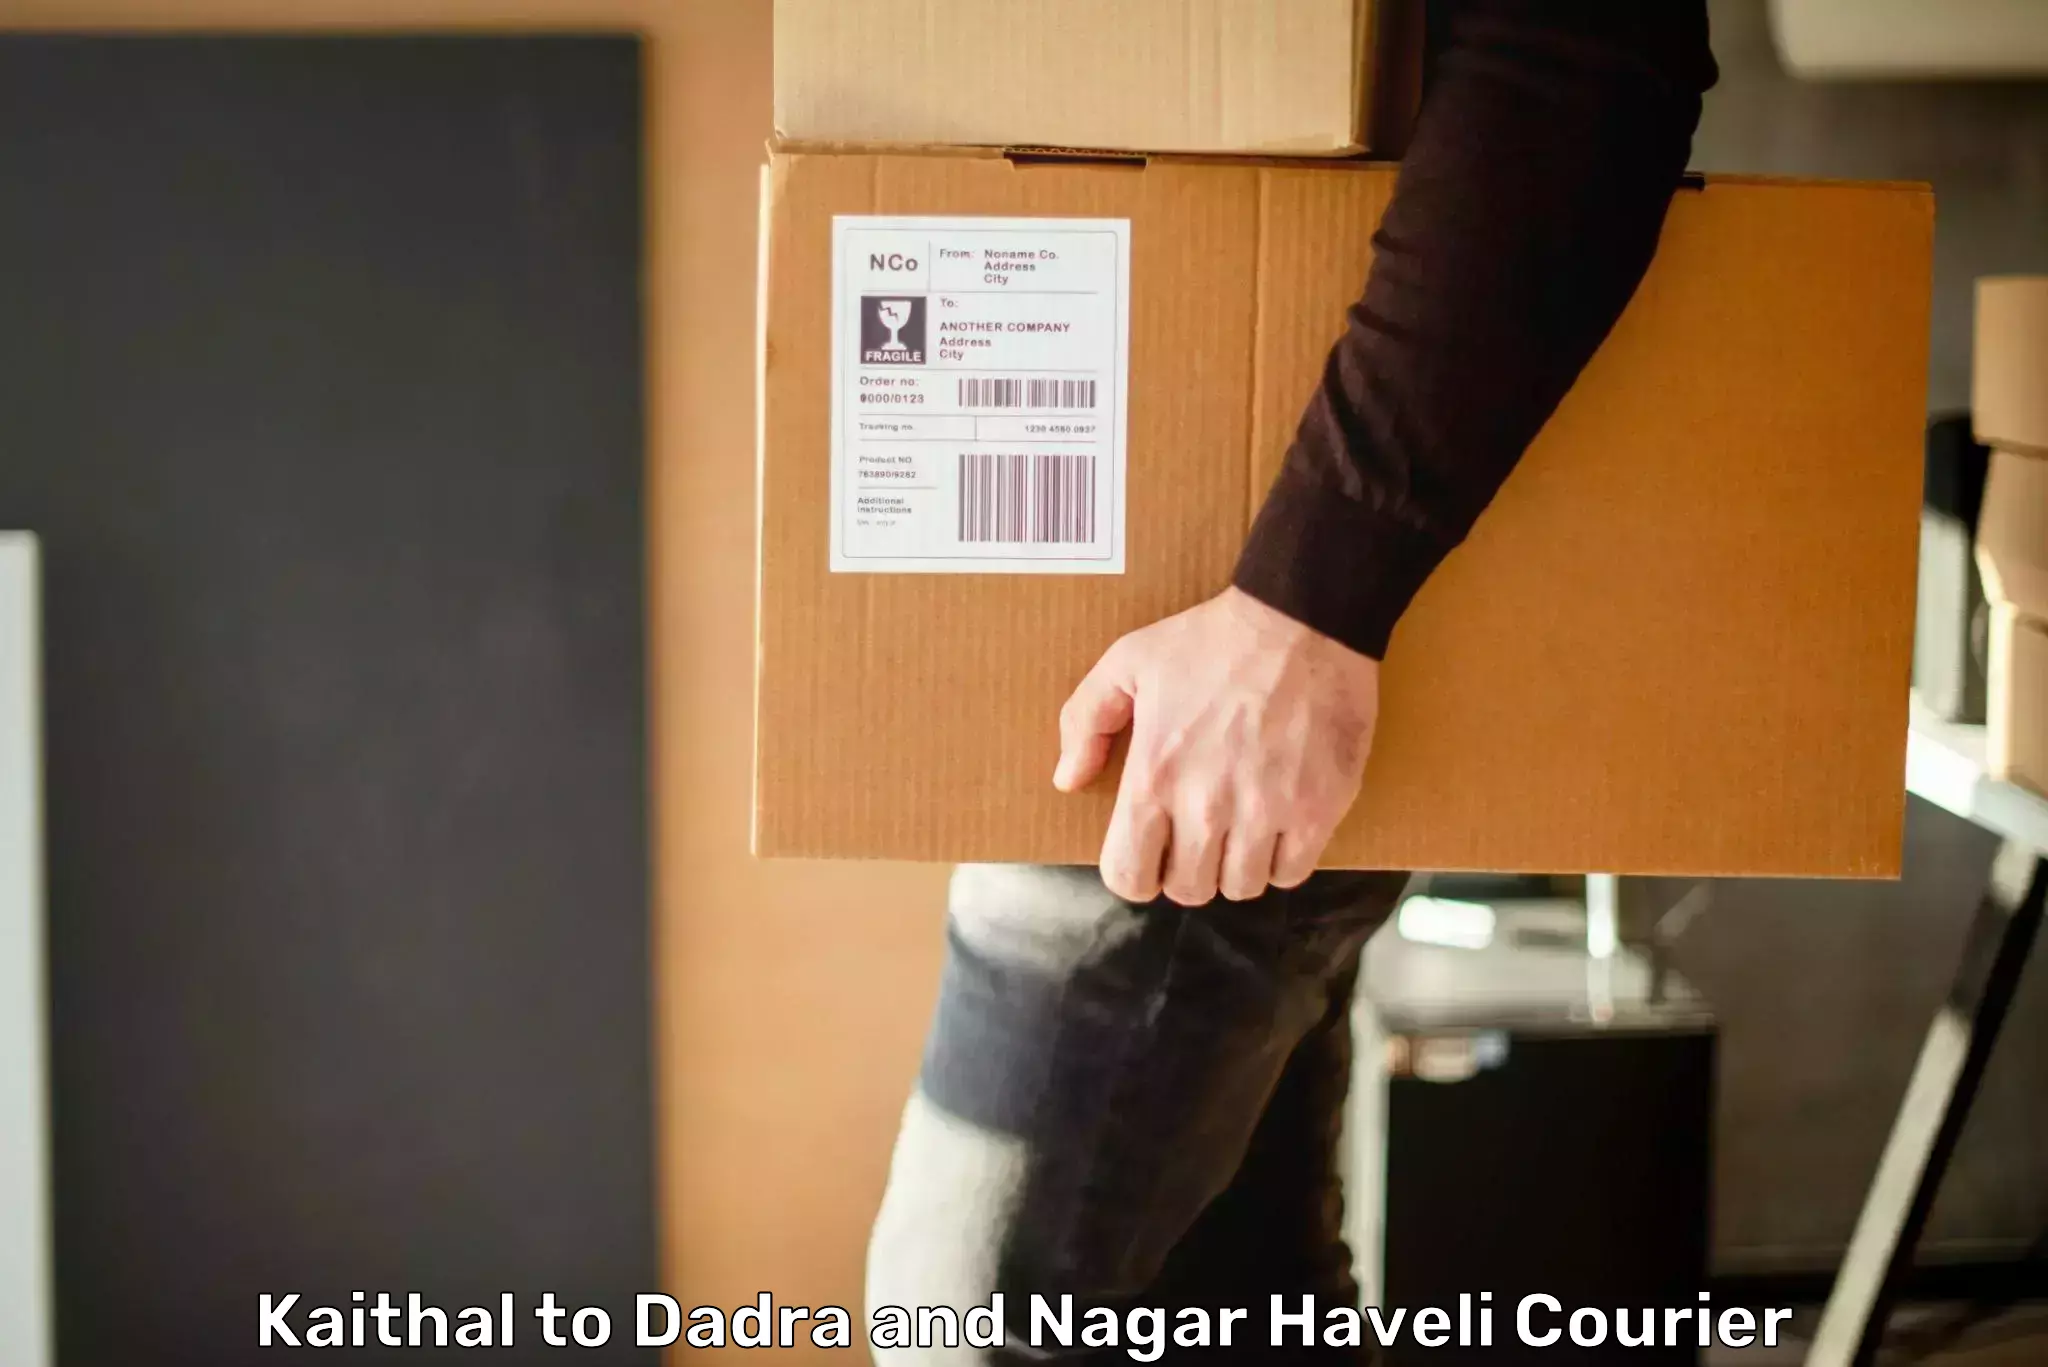 Dynamic courier operations Kaithal to Dadra and Nagar Haveli